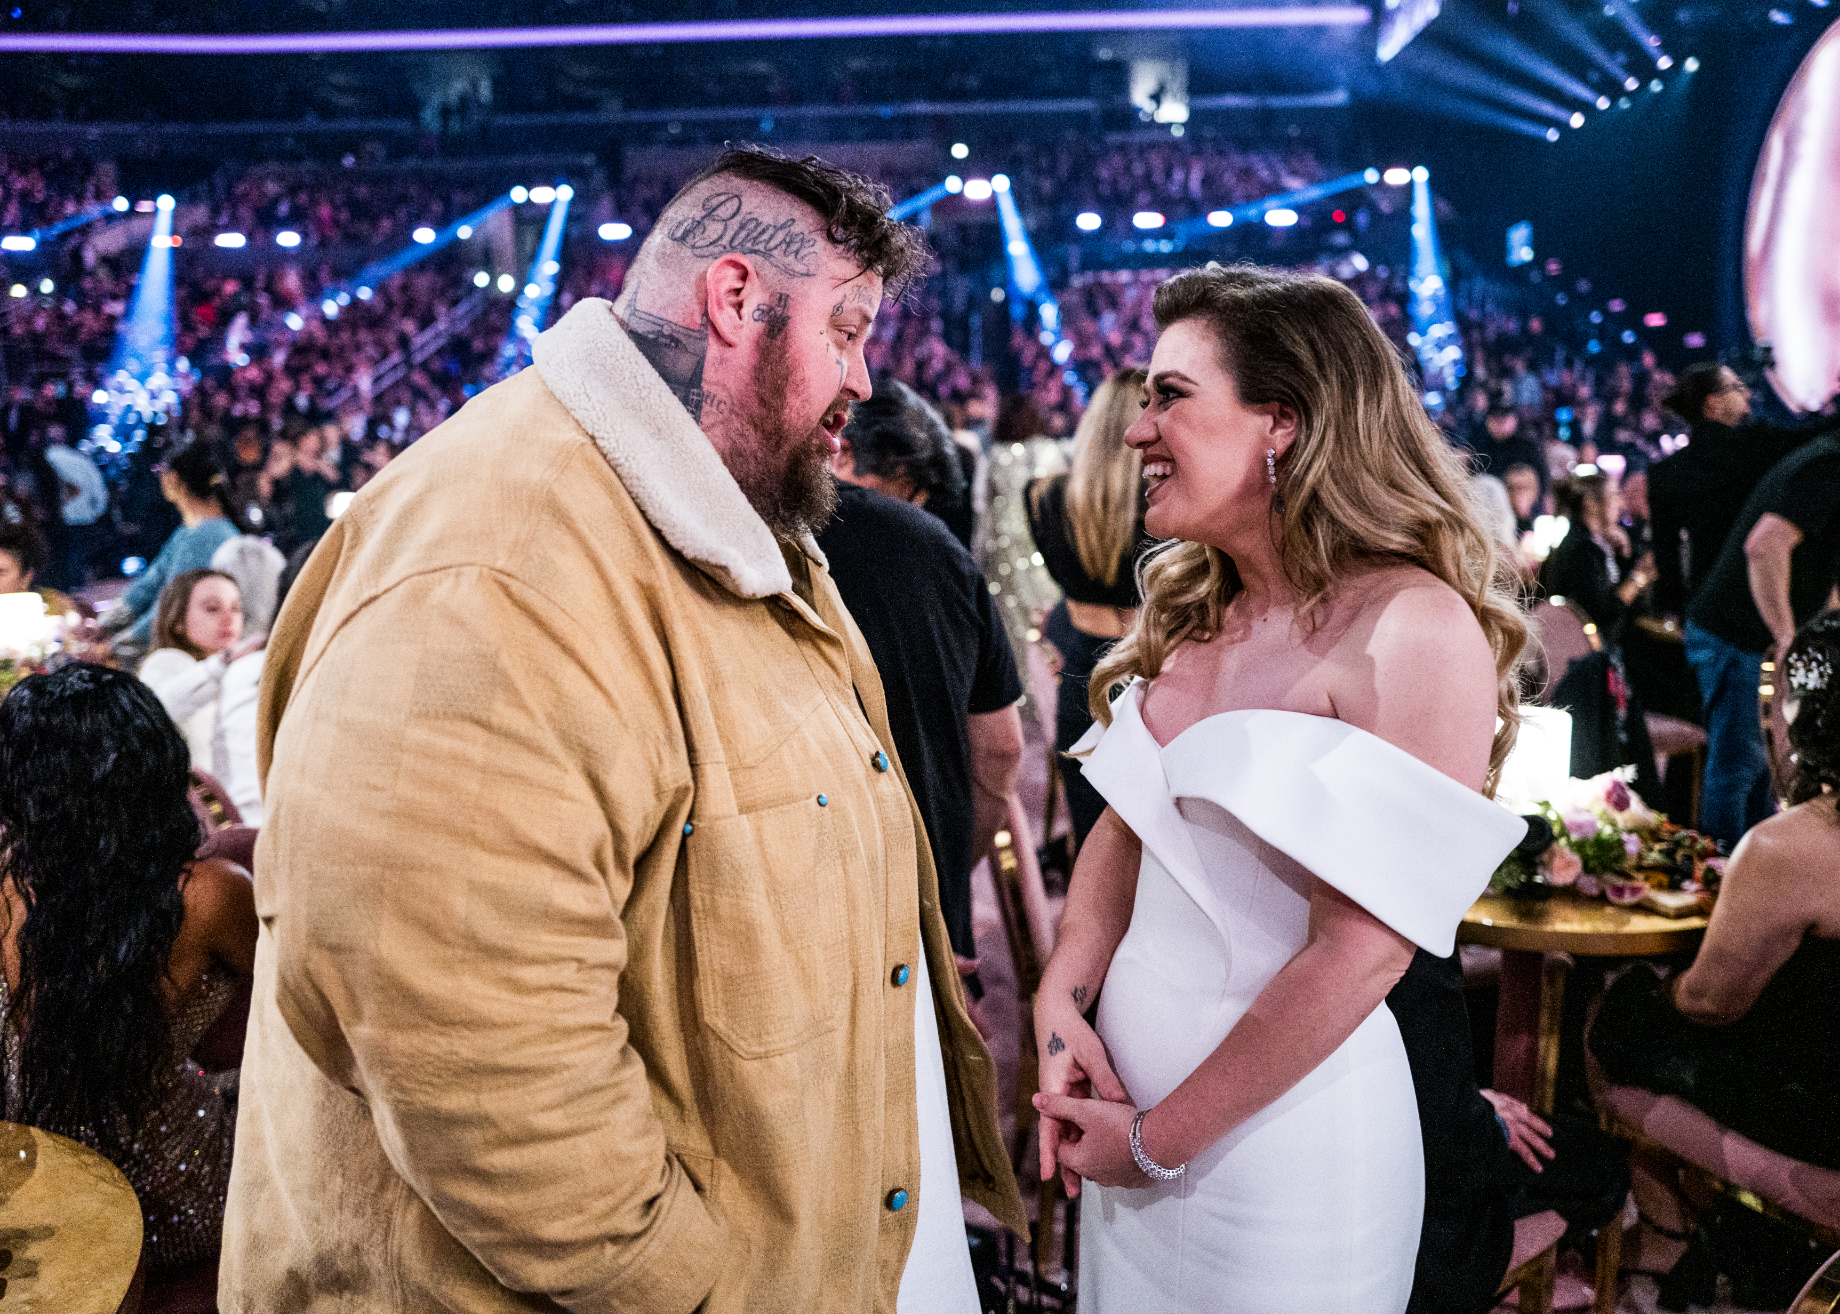 Jelly Roll and Kelly Clarkson at the Grammys